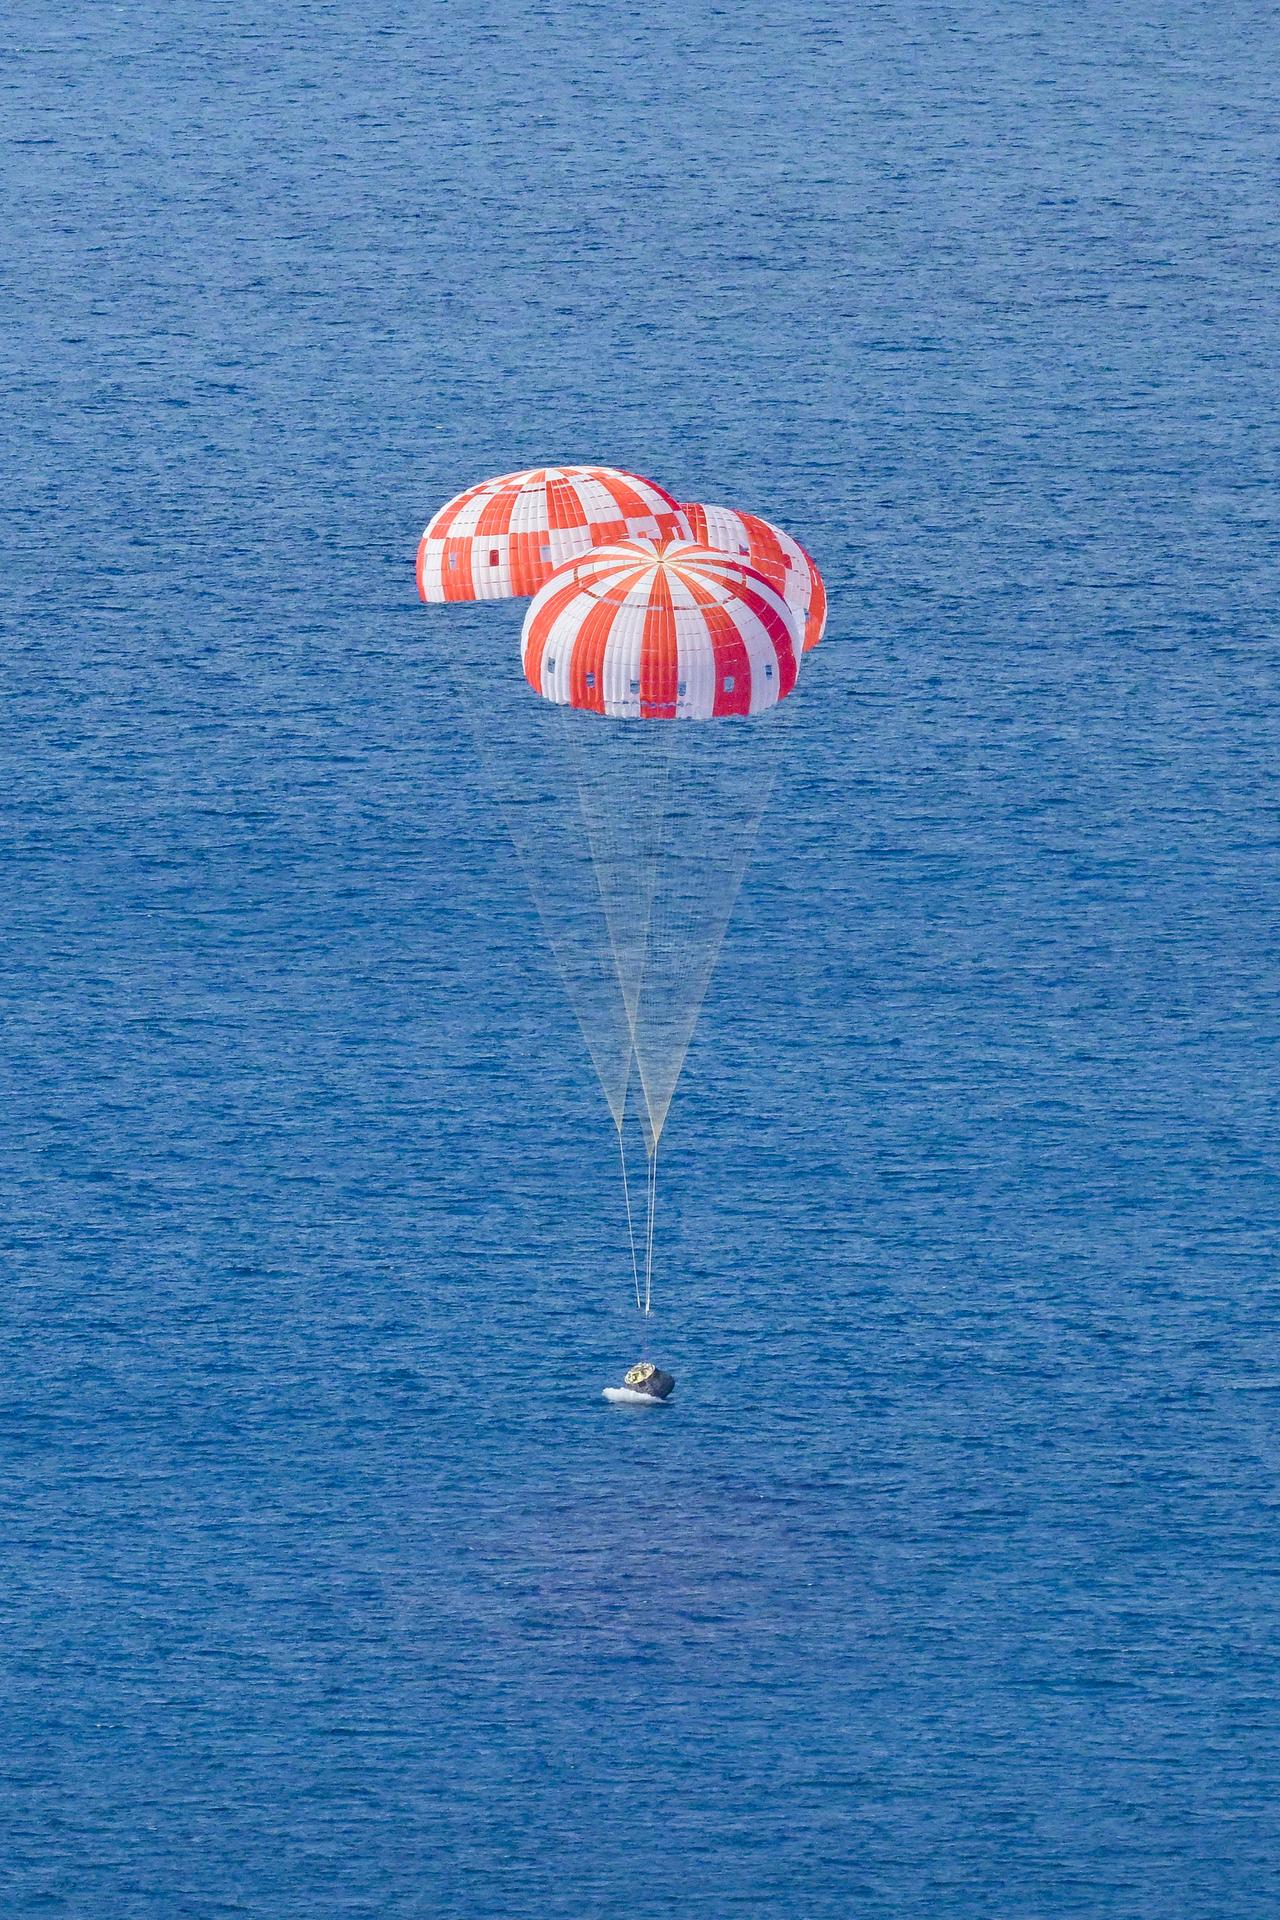 NASA's Orion spacecraft splashes down to conclude Artemis I mission